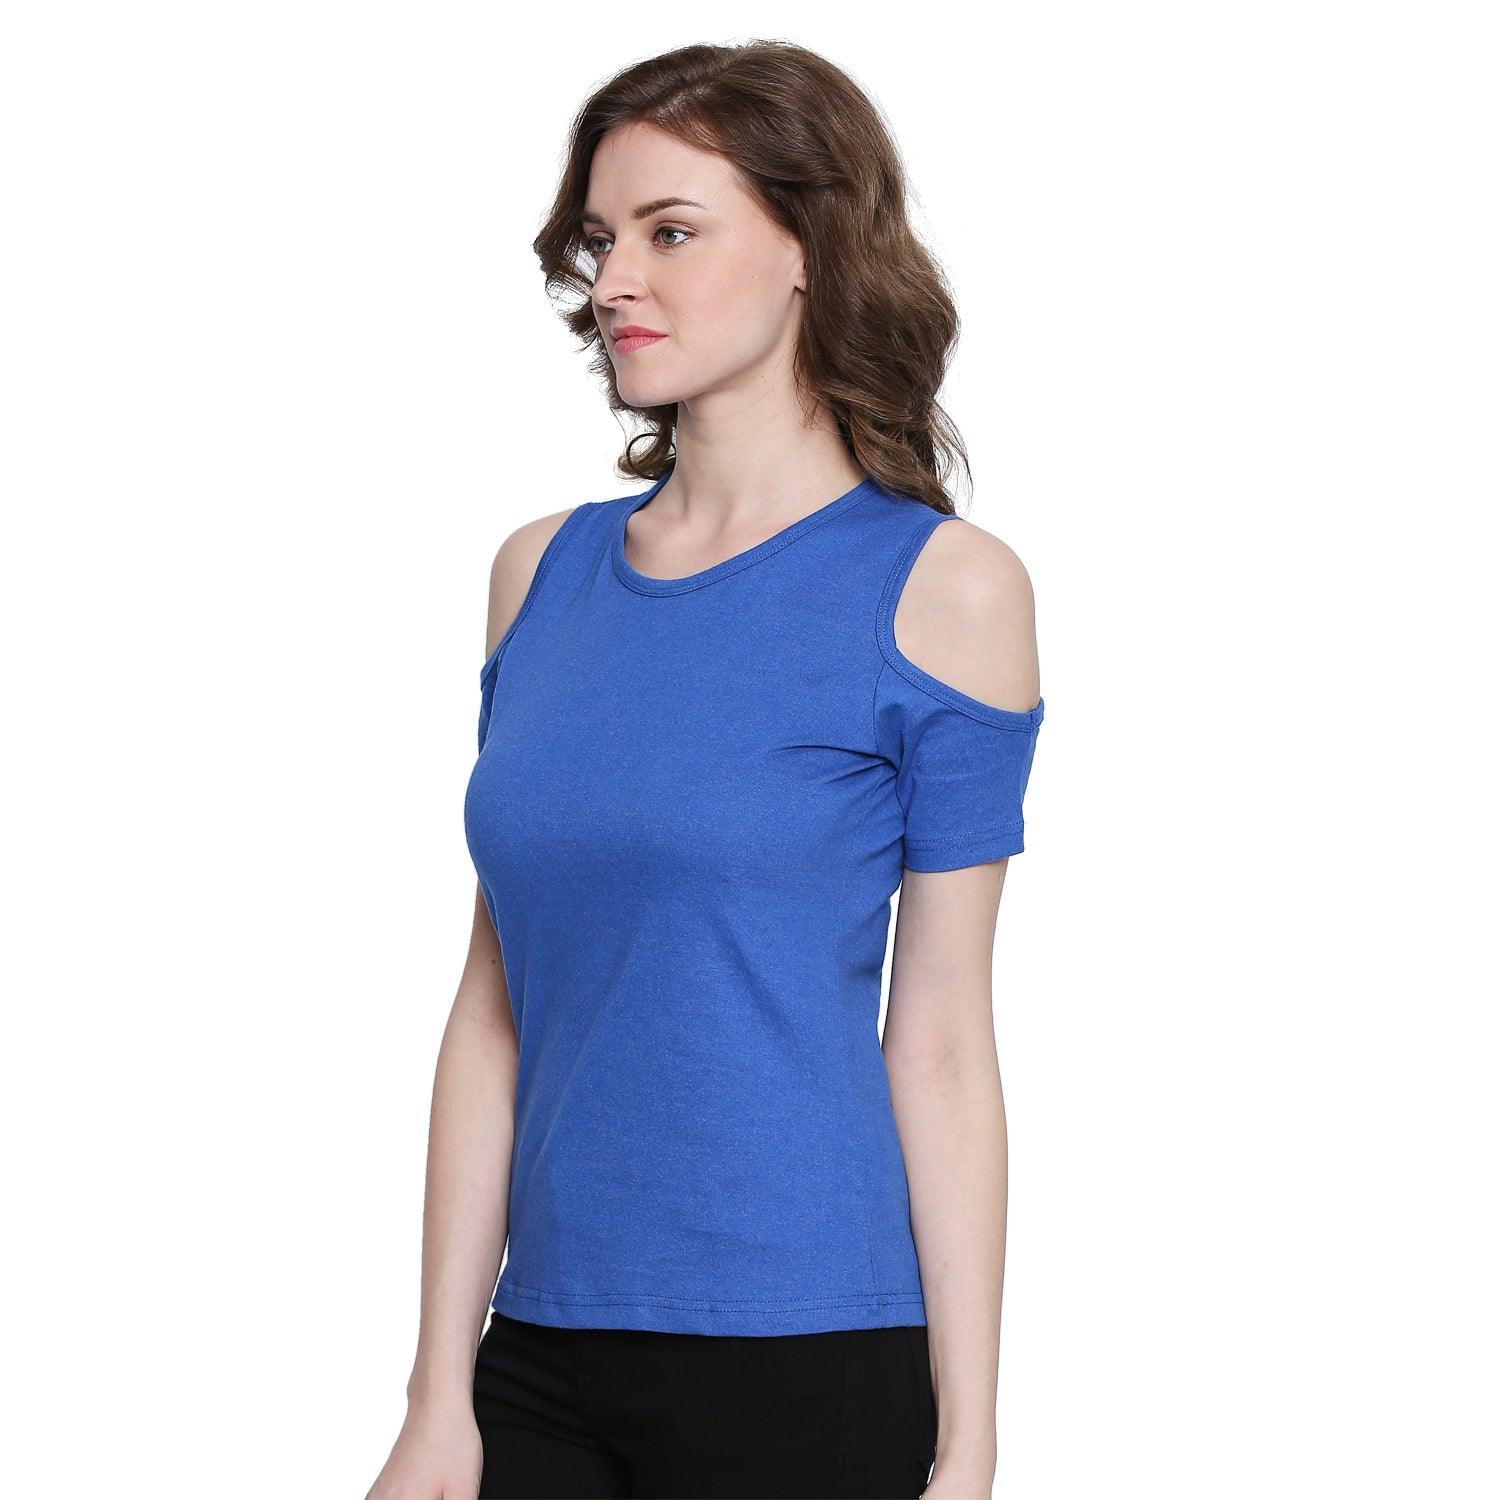 Women Solid Blue Round Neck Cold Shoulder T-shirt - Znxclothing